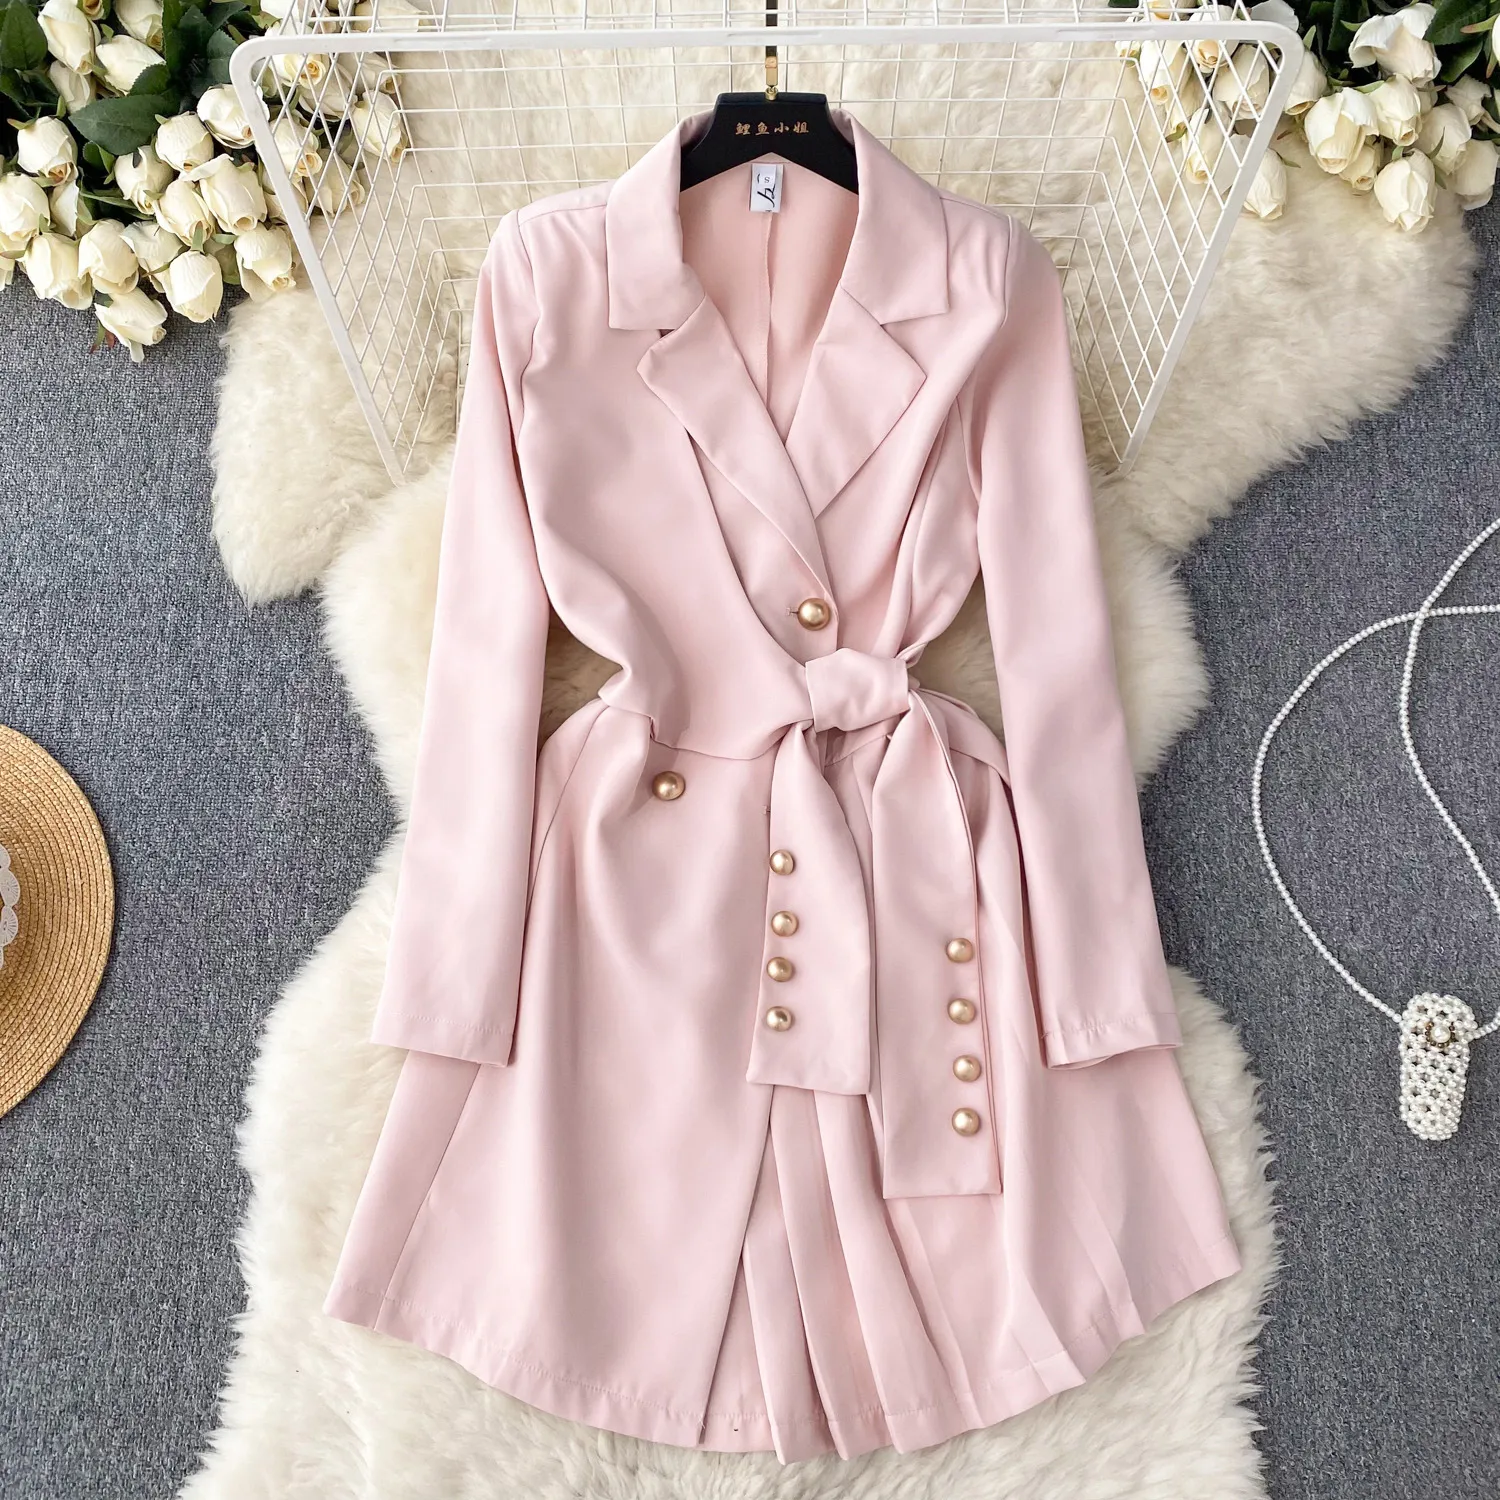 Workplace light mature style women's clothing temperament suit collar tie slim fit short design feeling pleated skirt long sleeved dress